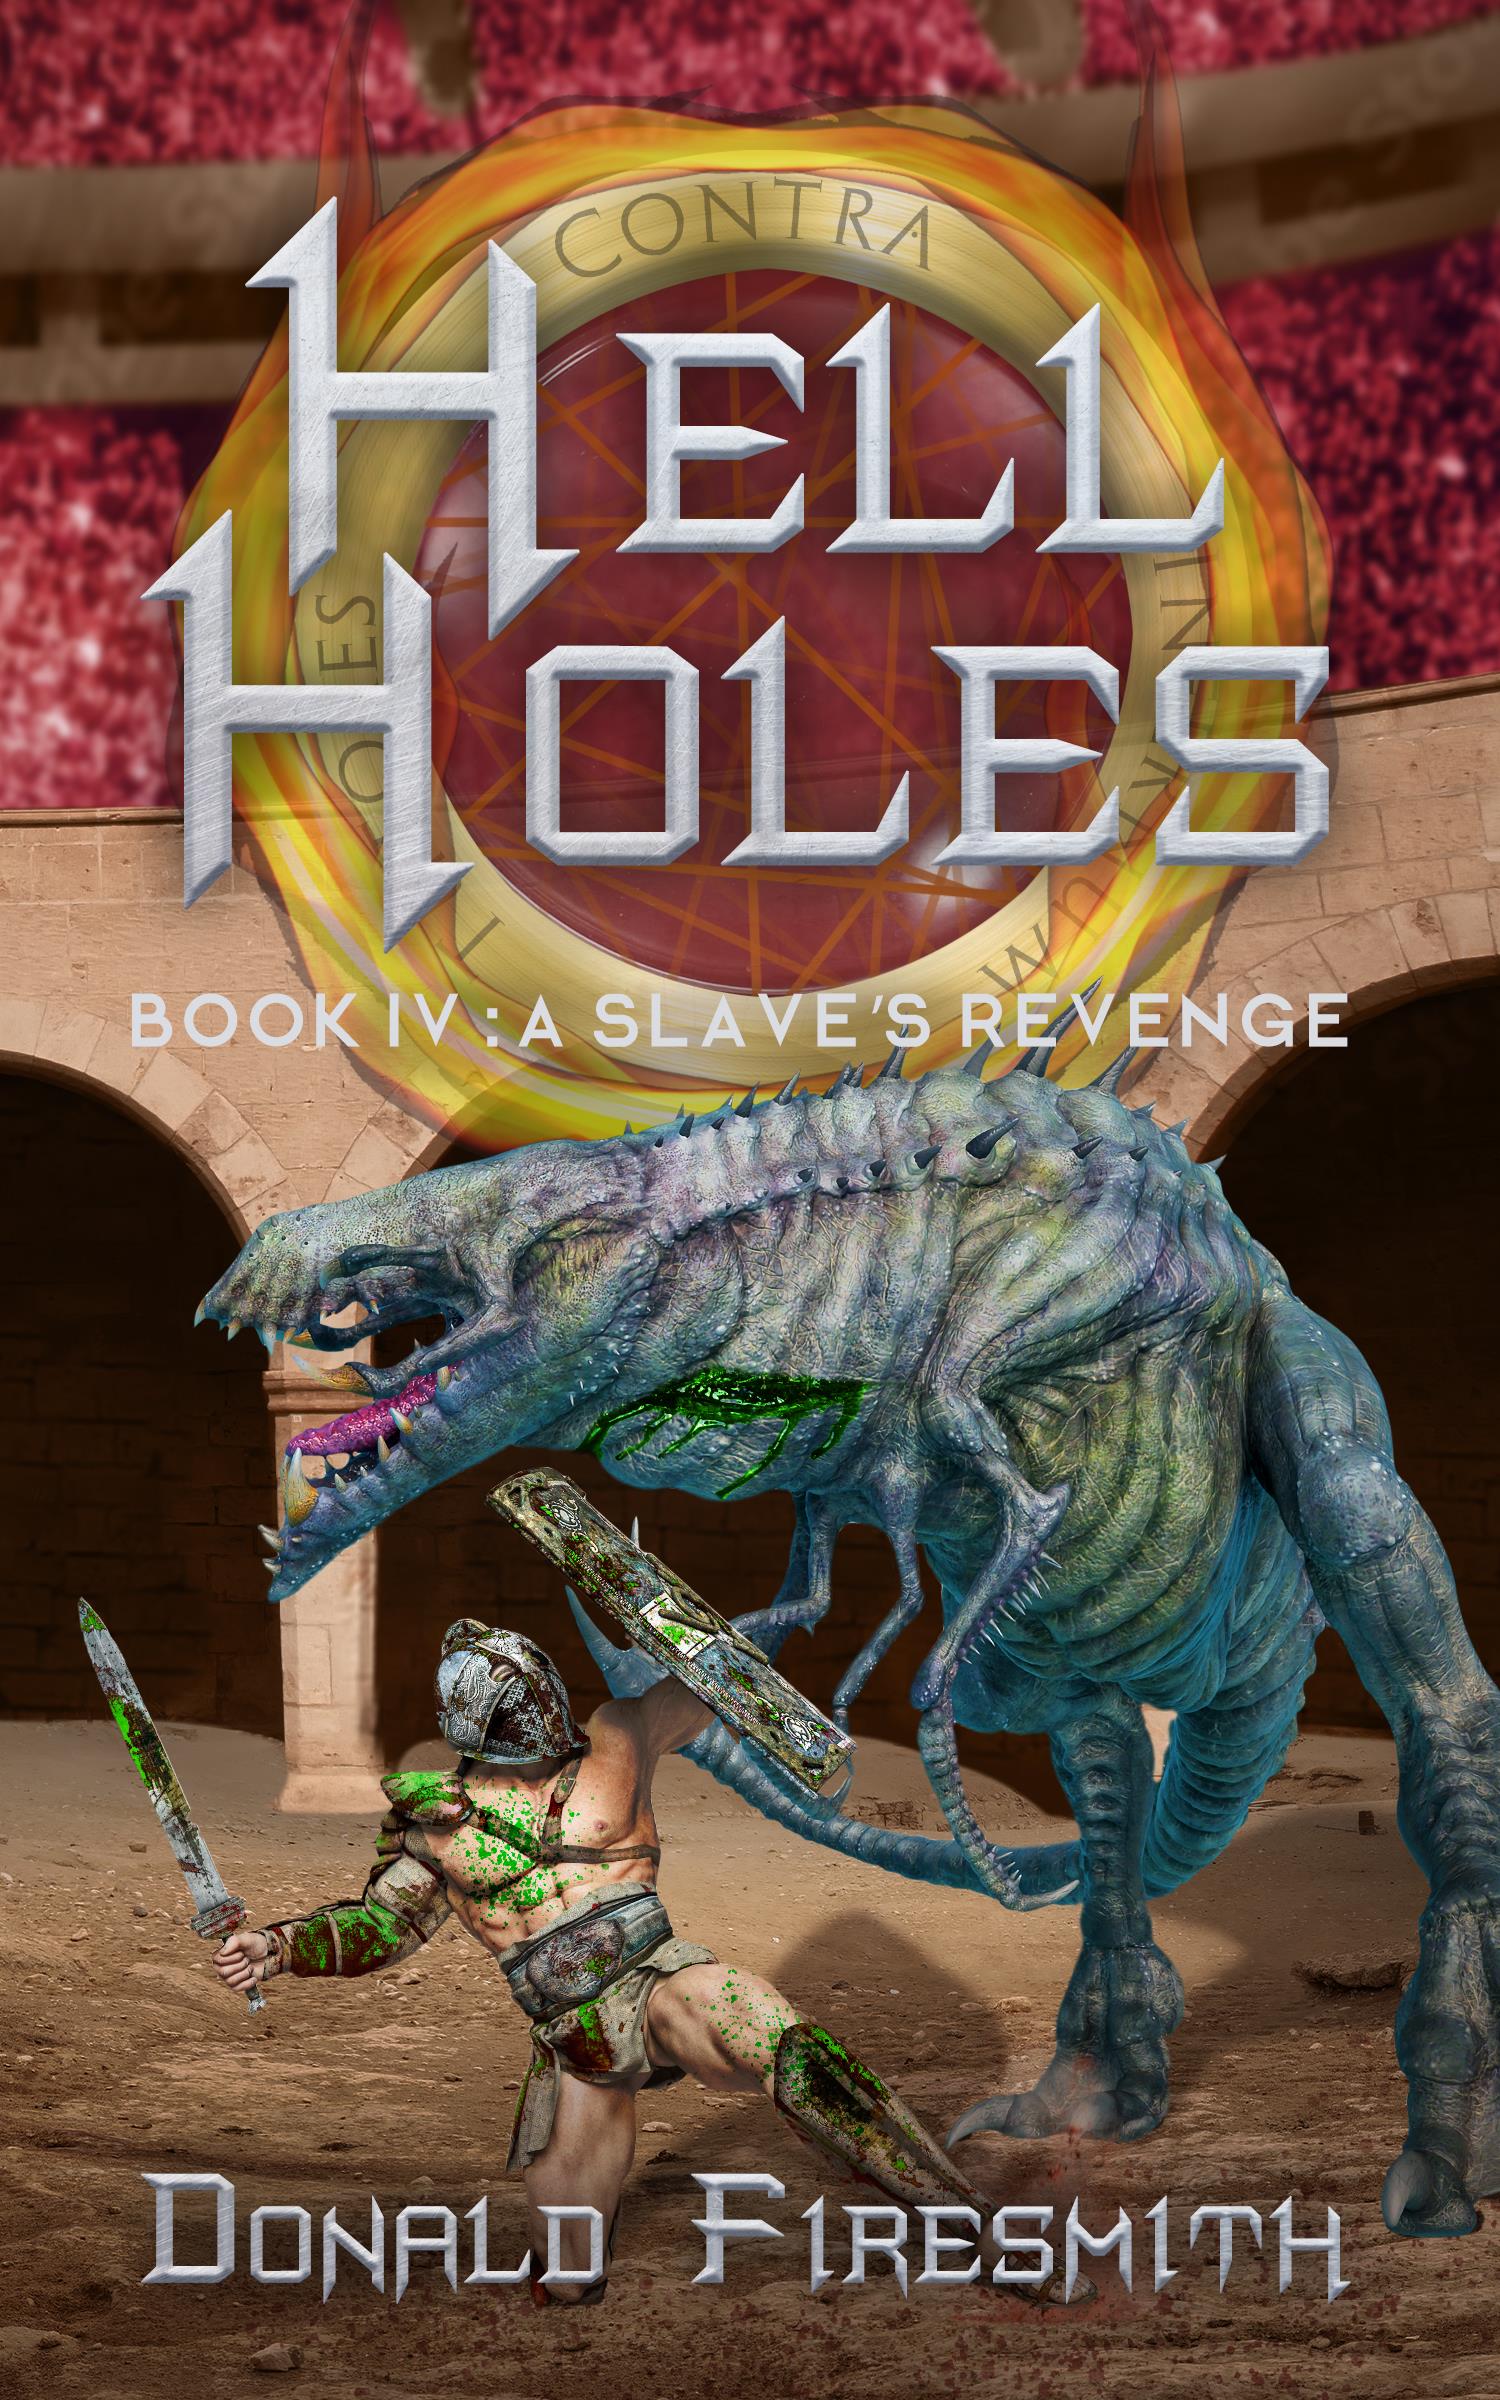 The front cover of Hell Hole 4: A Slave's Revenge